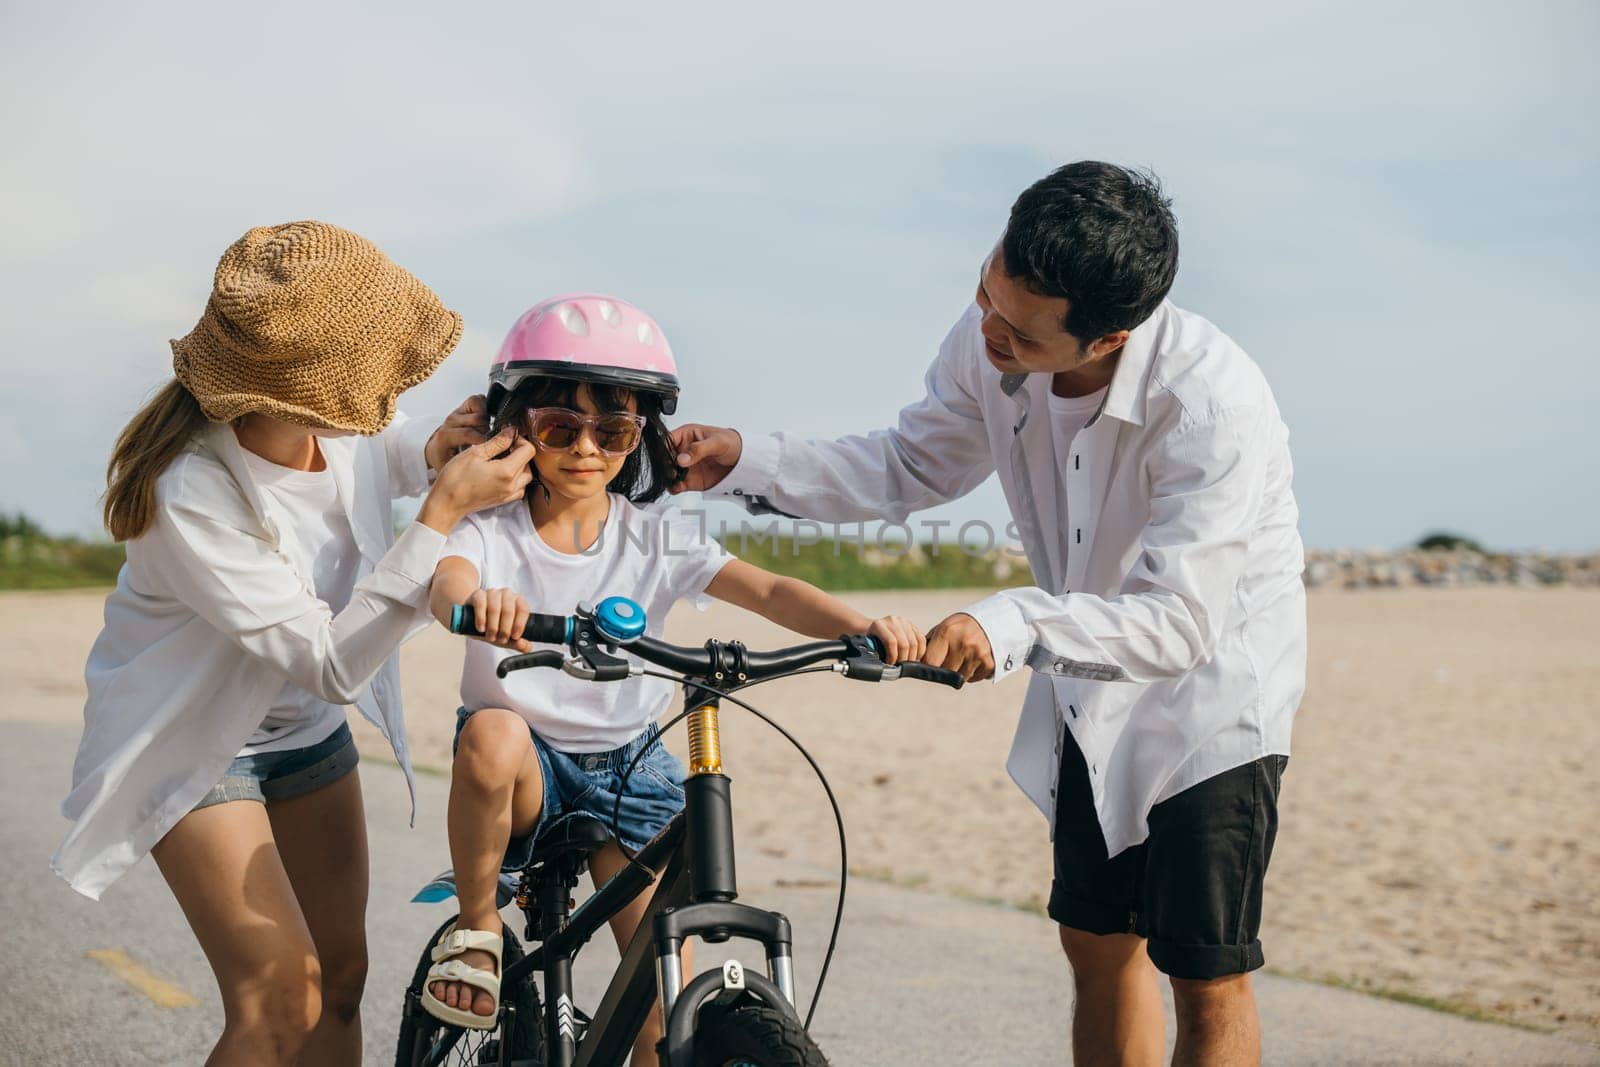 Under summer sun cheerful family enjoys road trip on sandy beach teaching and learning to ride bicycles. Safety laughter and spirit of childhood adventure define this heartwarming family scene. by Sorapop